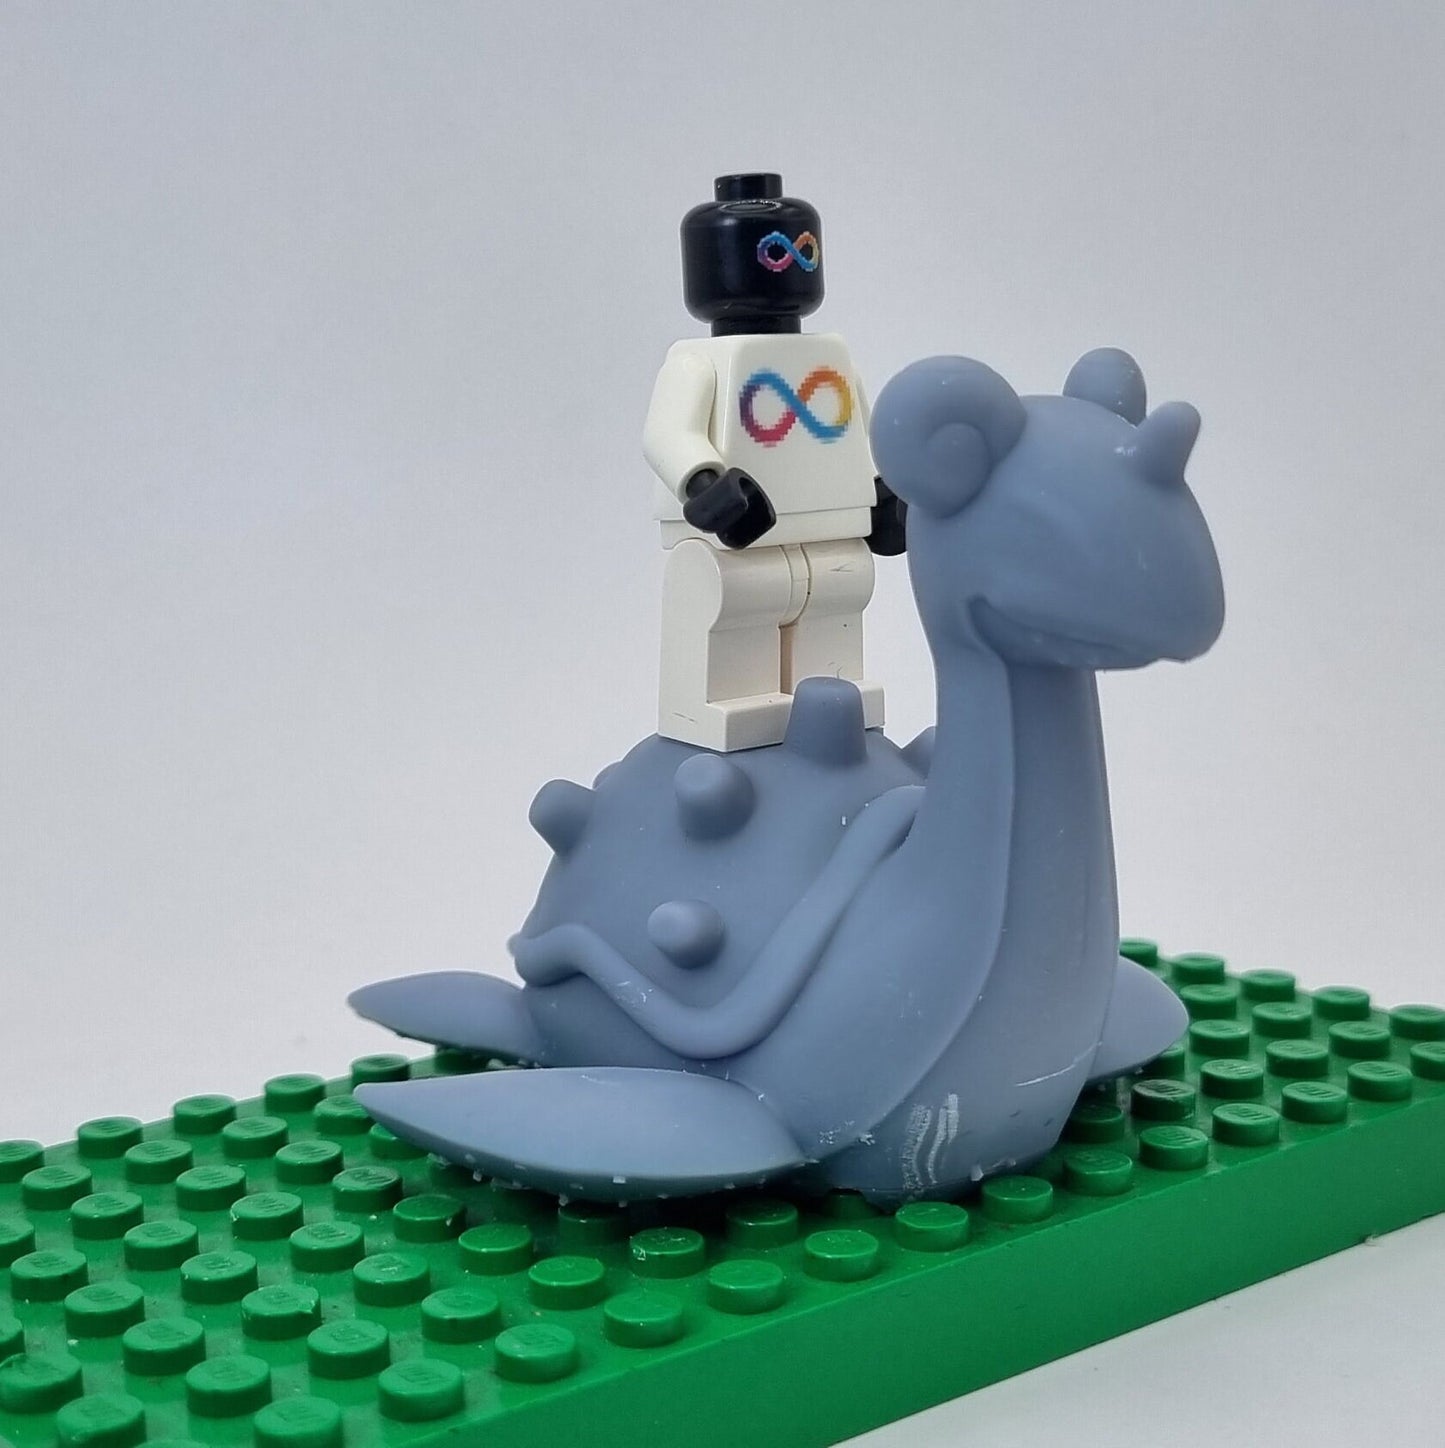 Building toy custom 3D printed animal to catch seaturtle mix